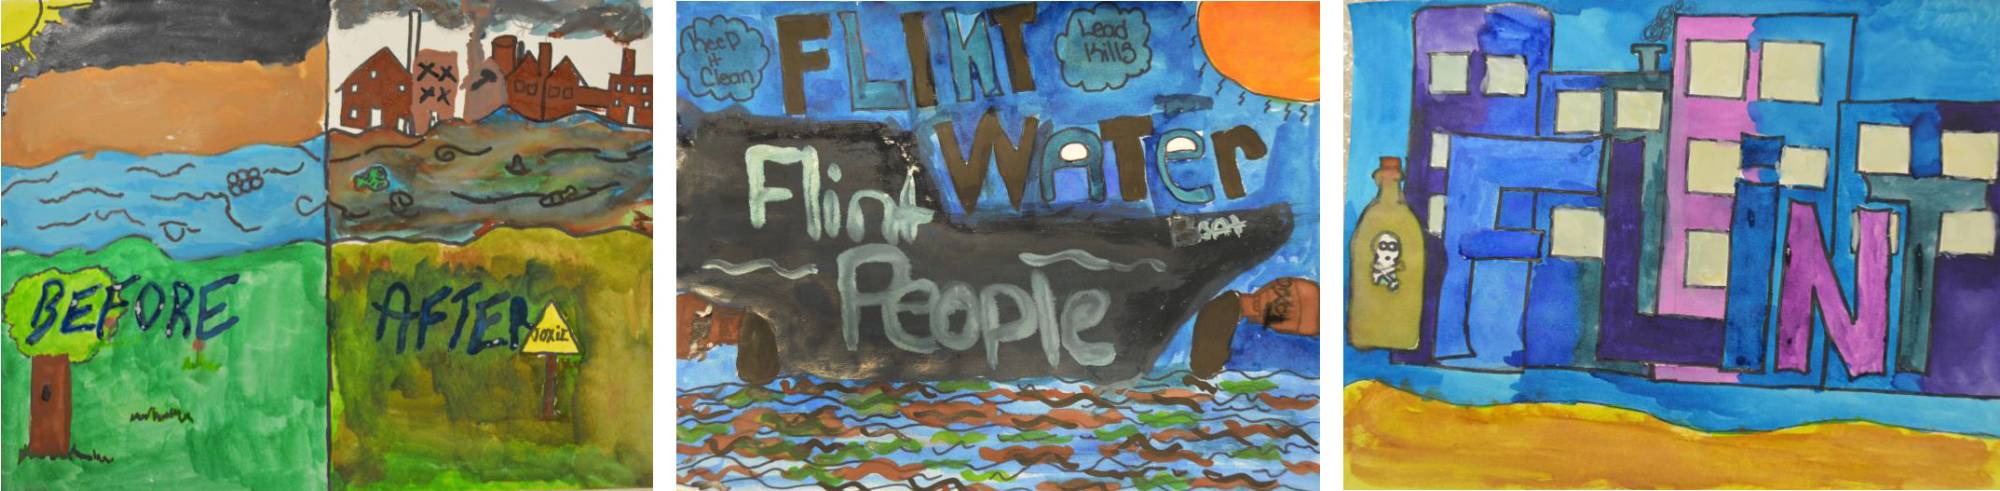 Three paintings by elementary aged students from Flint, MI, the paintings depict the students' thoughts on the Flint Water Crisis and how it's personally affected their lives.